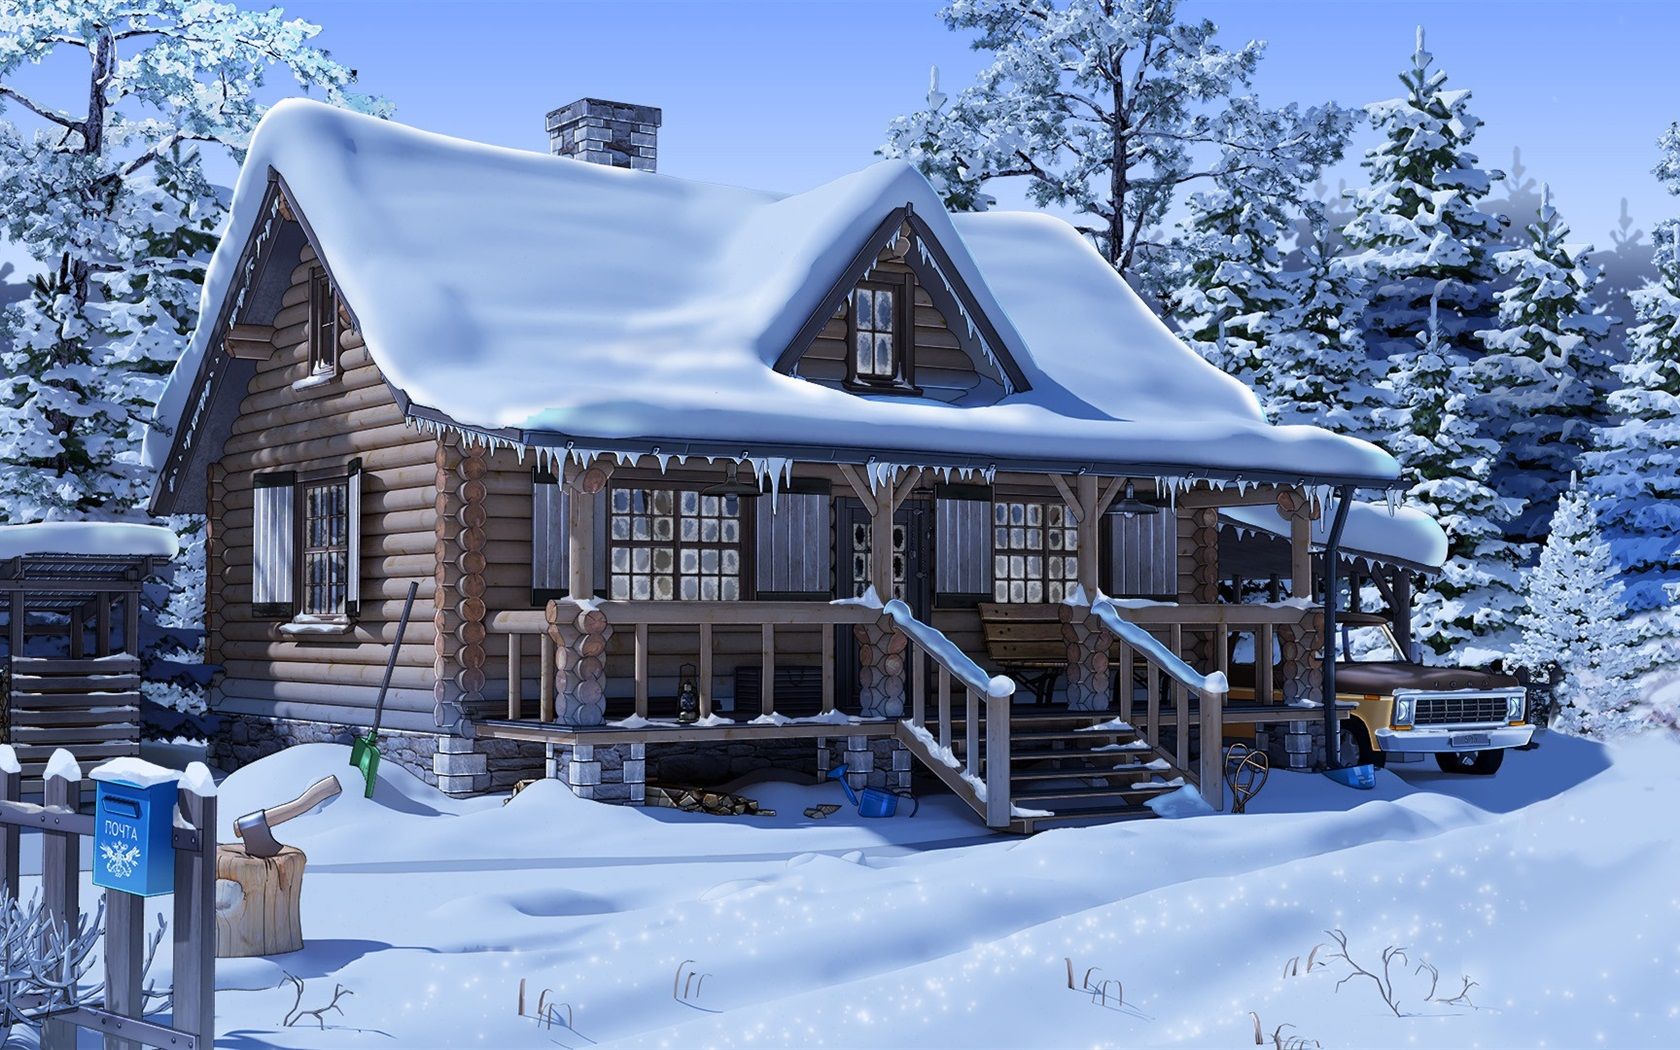 Snow, House, Trees, Car, Anime 640x960 IPhone 4 4S Wallpaper, Background, Picture, Image